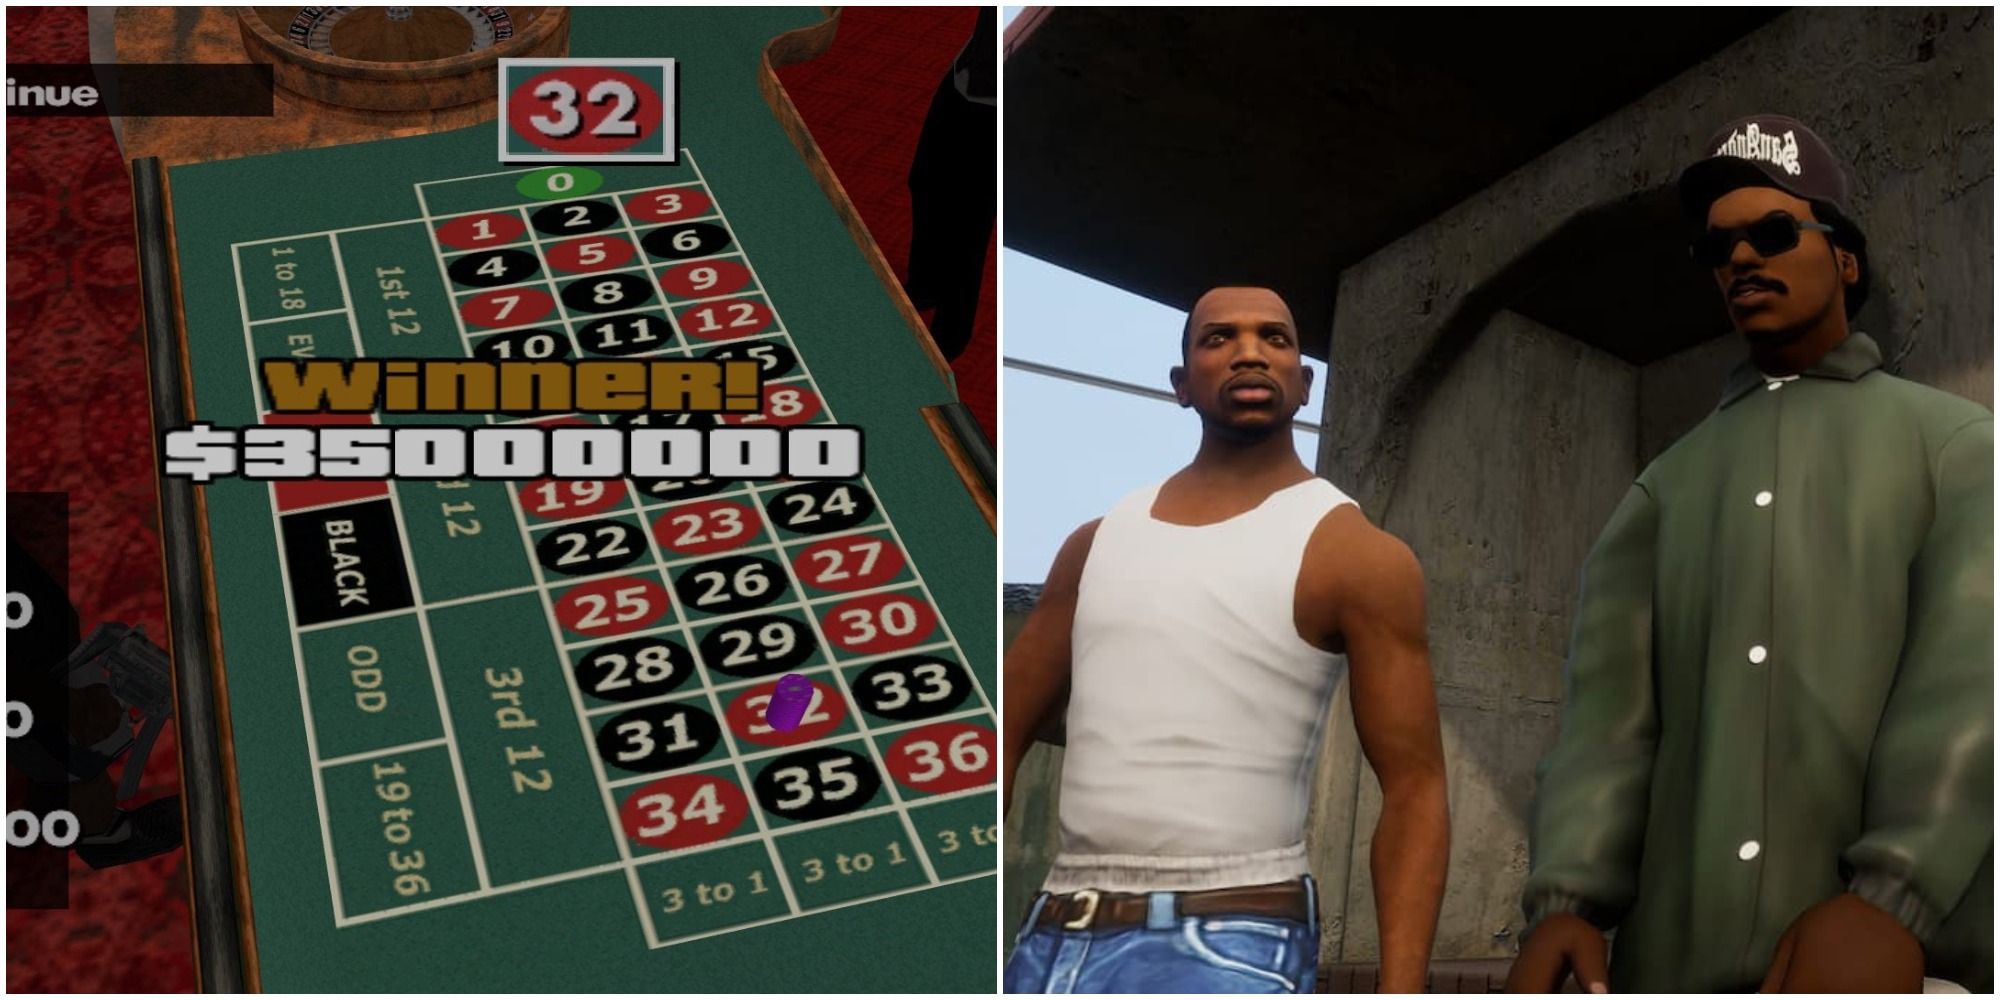 If you want a quick cash, just play Video Poker. No glitches, mods and  cheats. : r/GTA